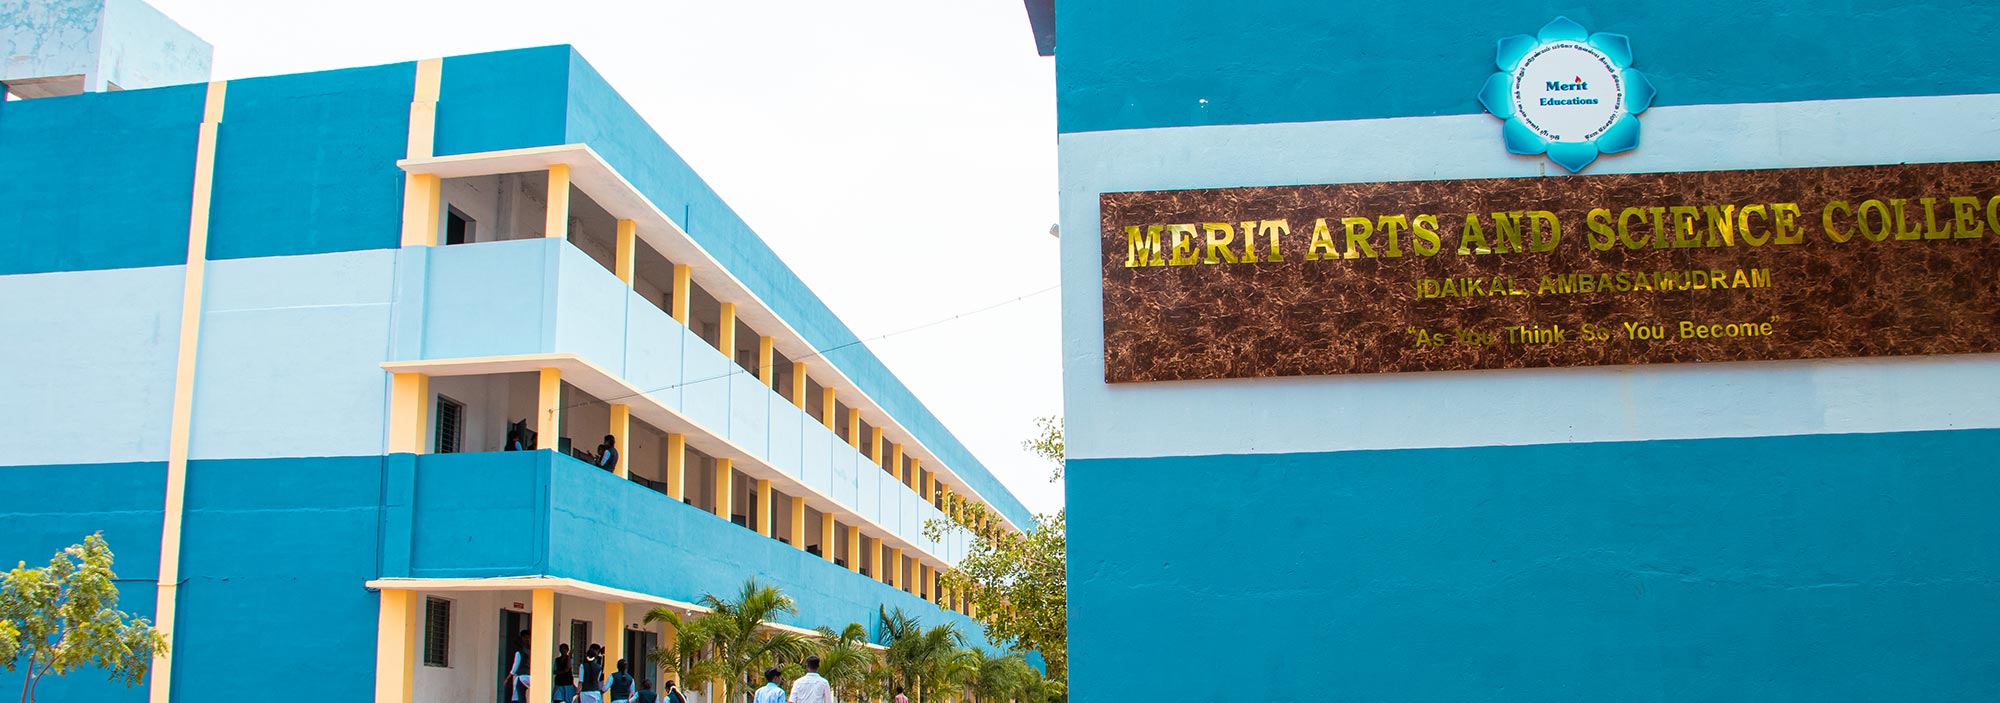 Merit Arts and Science College